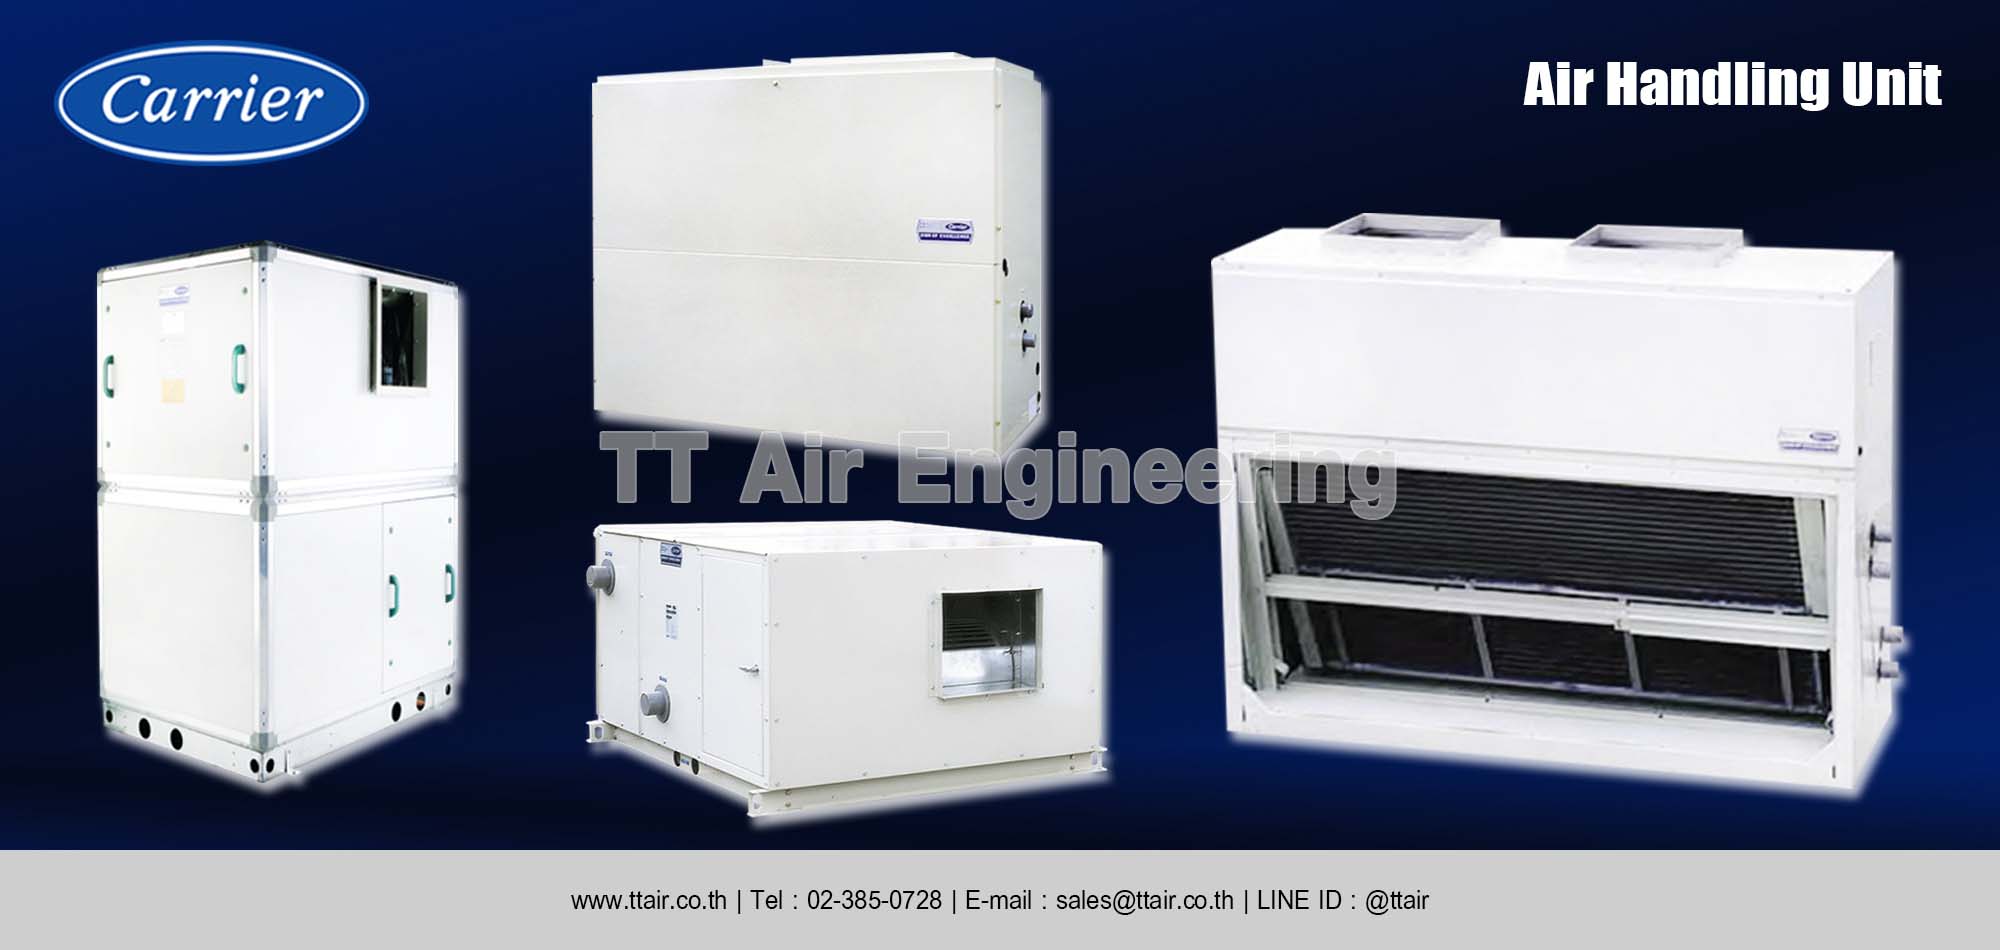 Carrier Air Handling Unit category